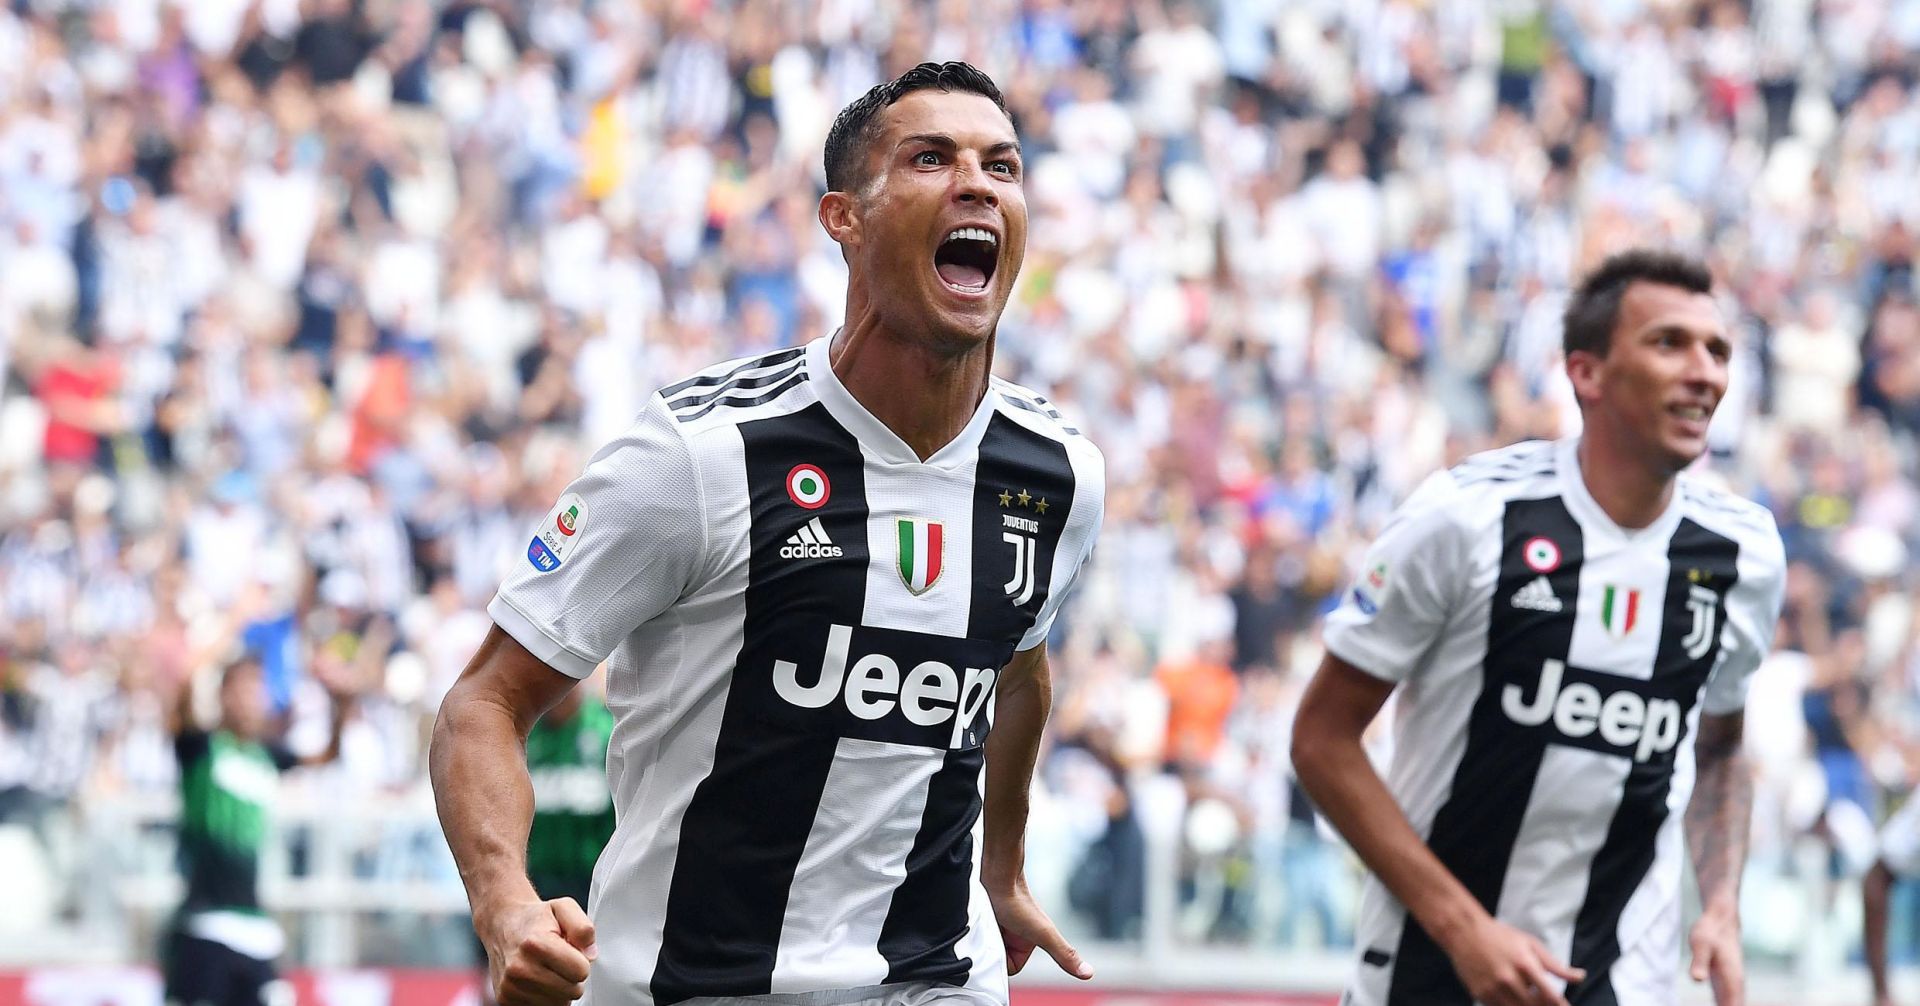 epa07024963 Juventus's Cristiano Ronaldo jubilates after scoring the 1-0 during the italian Serie A soccer match Juventus FC vs US Sassuolo at Allianz Stadium in Turin, Italy, 16 September 2018.  EPA/ALESSANDRO DI MARCO